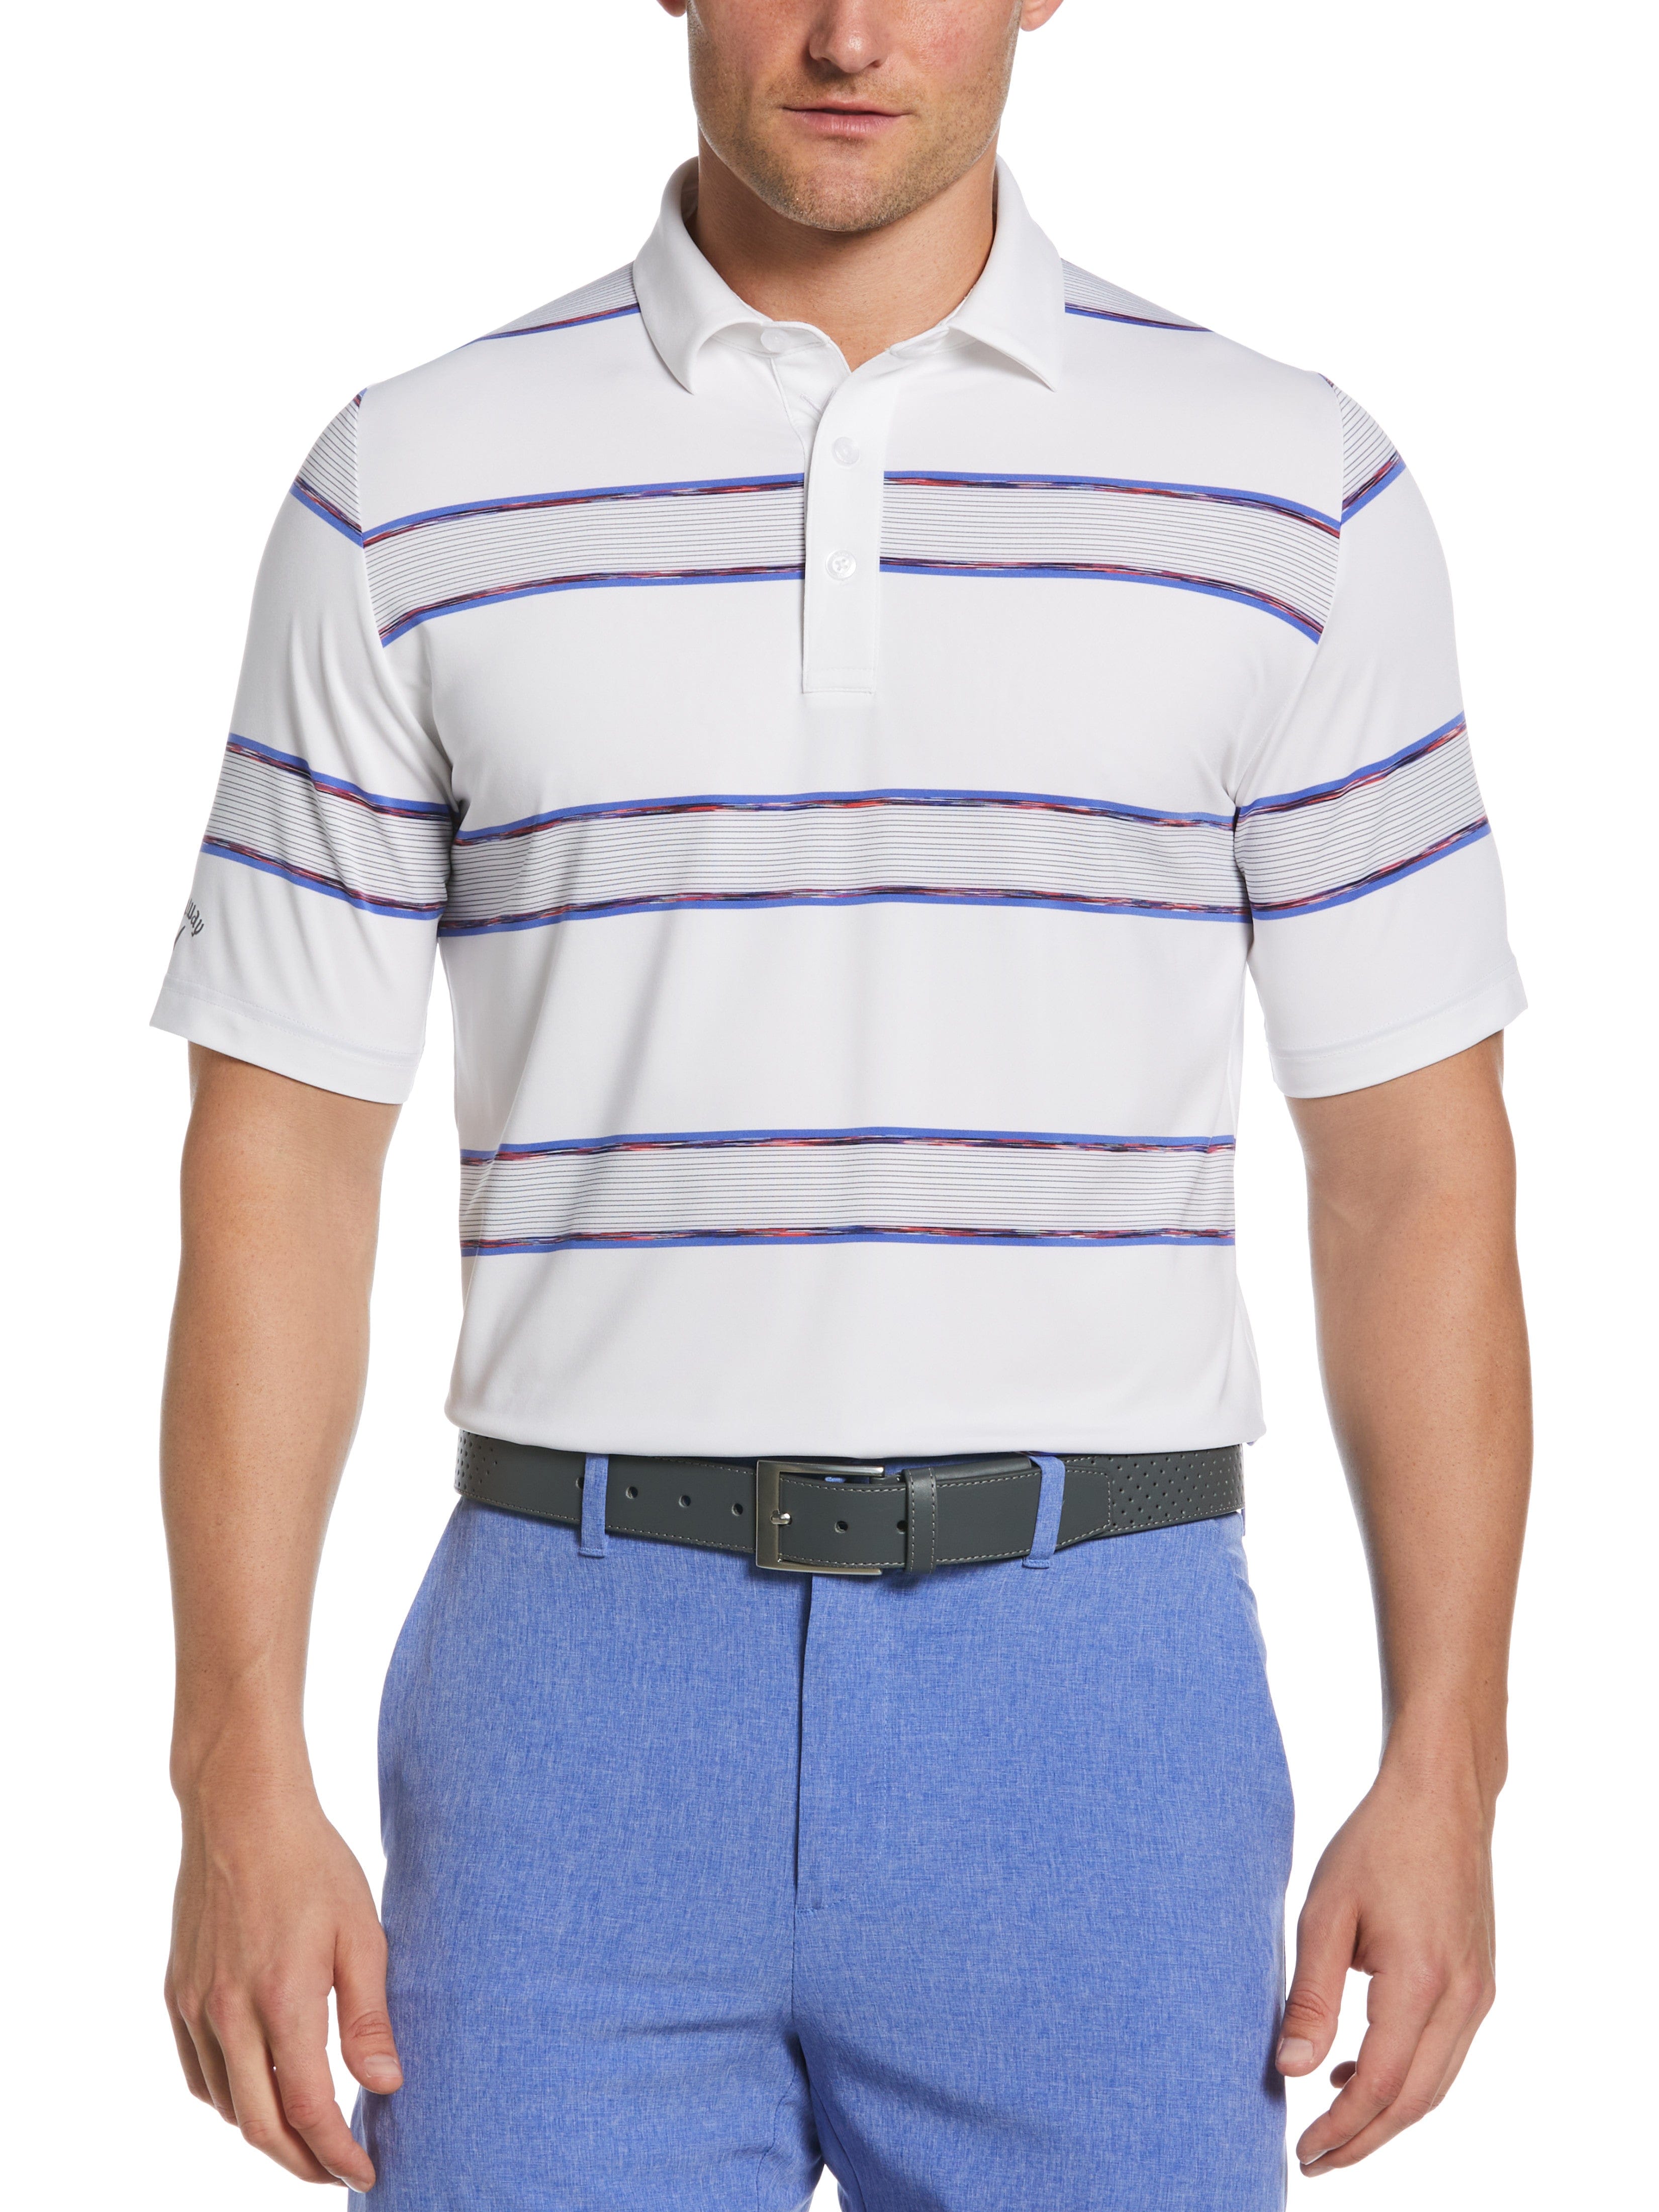 Callaway Apparel Mens Yarn Dyed Space Dye Filtered Stripe Golf Polo Shirt, Size Small, White, Recycled Polyester/Polyester/Elastane